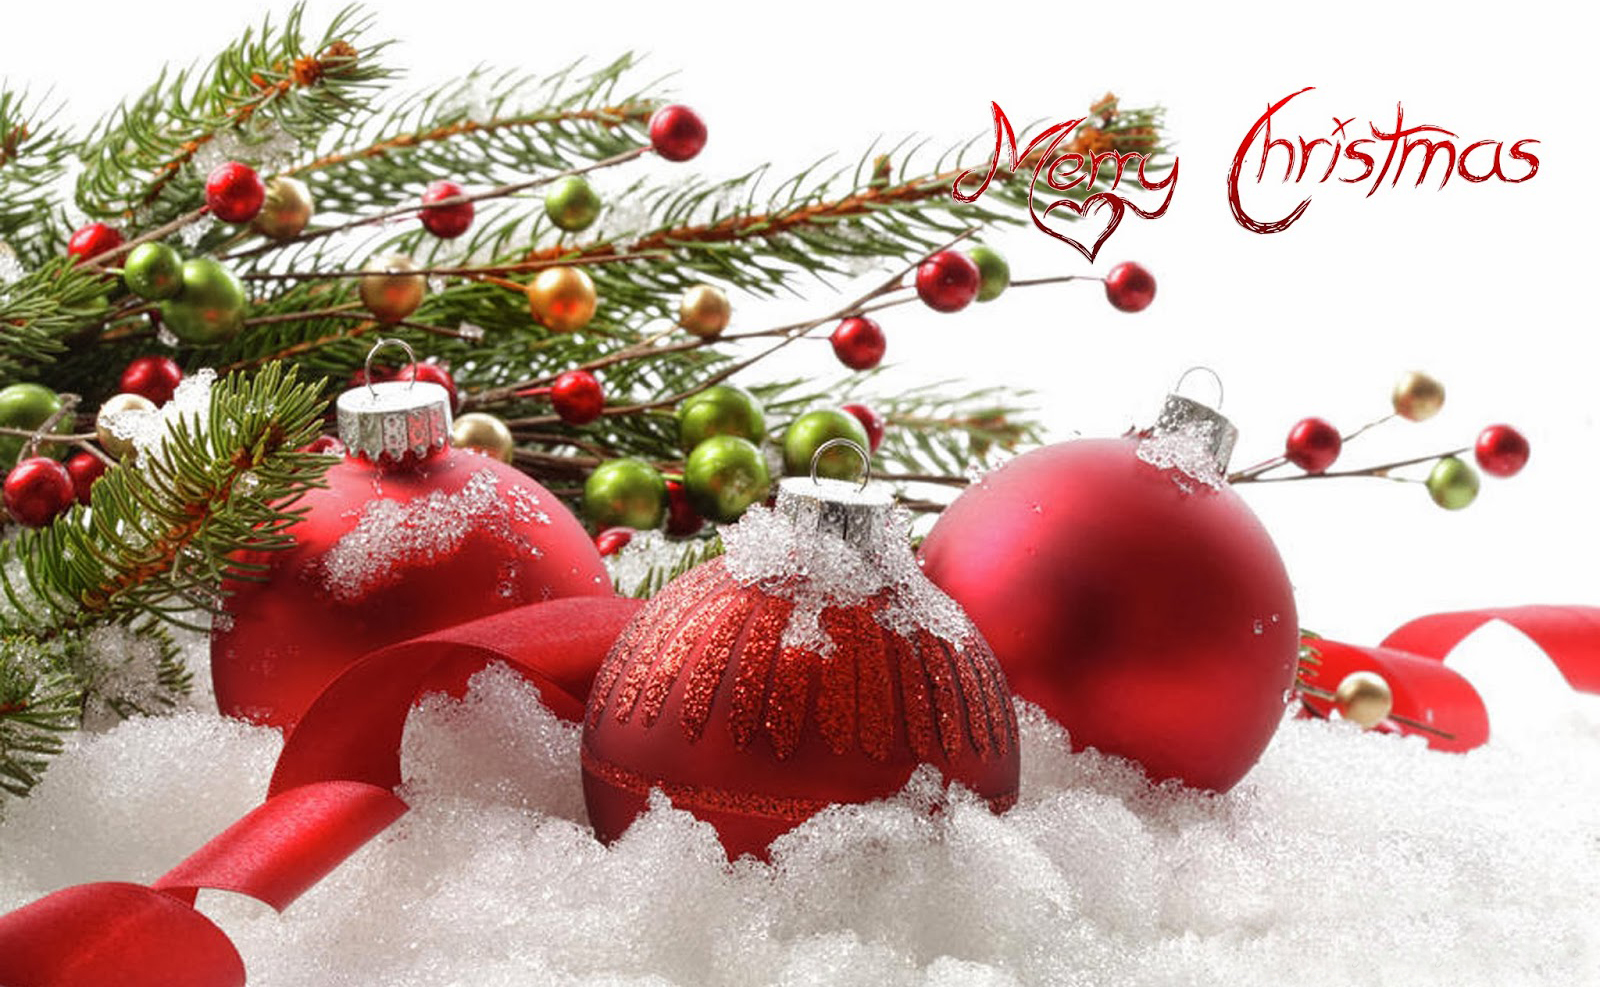 Merry Christmas Wishes Messages Image Wallpaper Greetings Quotes